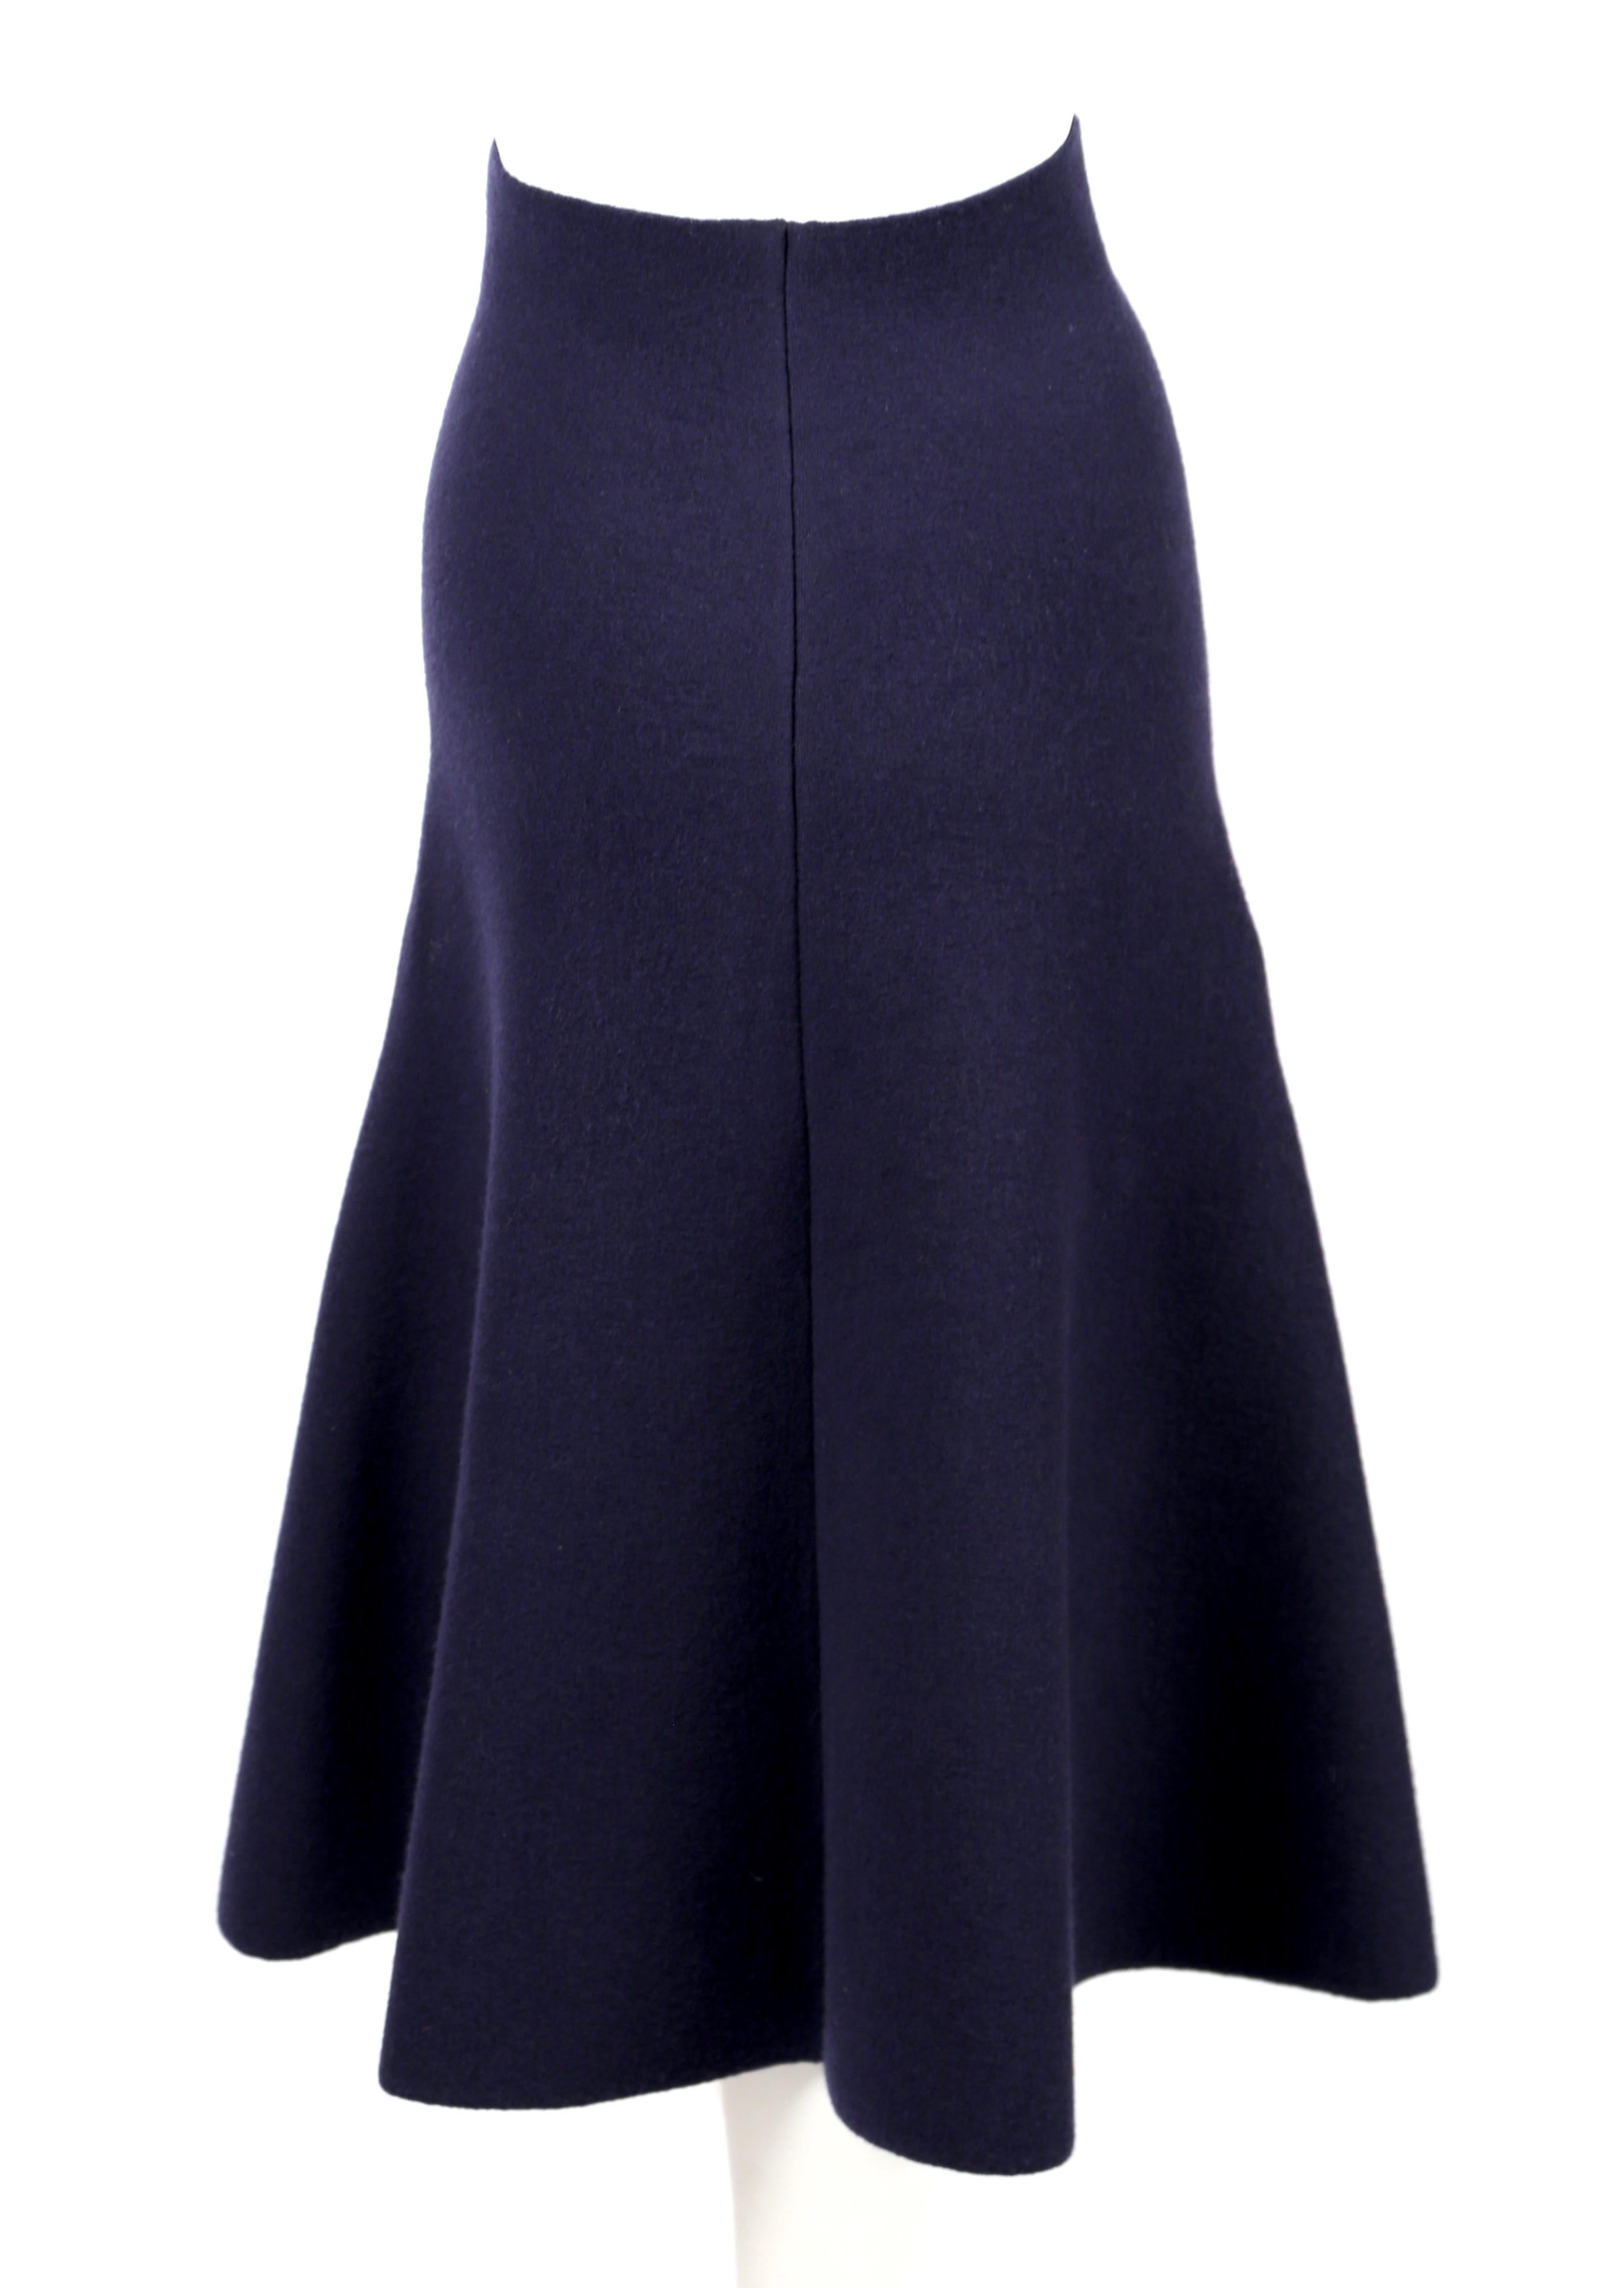 Deep navy-blue, flared knit skirt designed by Phoebe Philo for Celine exactly as seen on the runway for fall of 2013. Very flattering and comfortable fit. Labeled a French size XS. Approximate measurements (unstretched) : 26